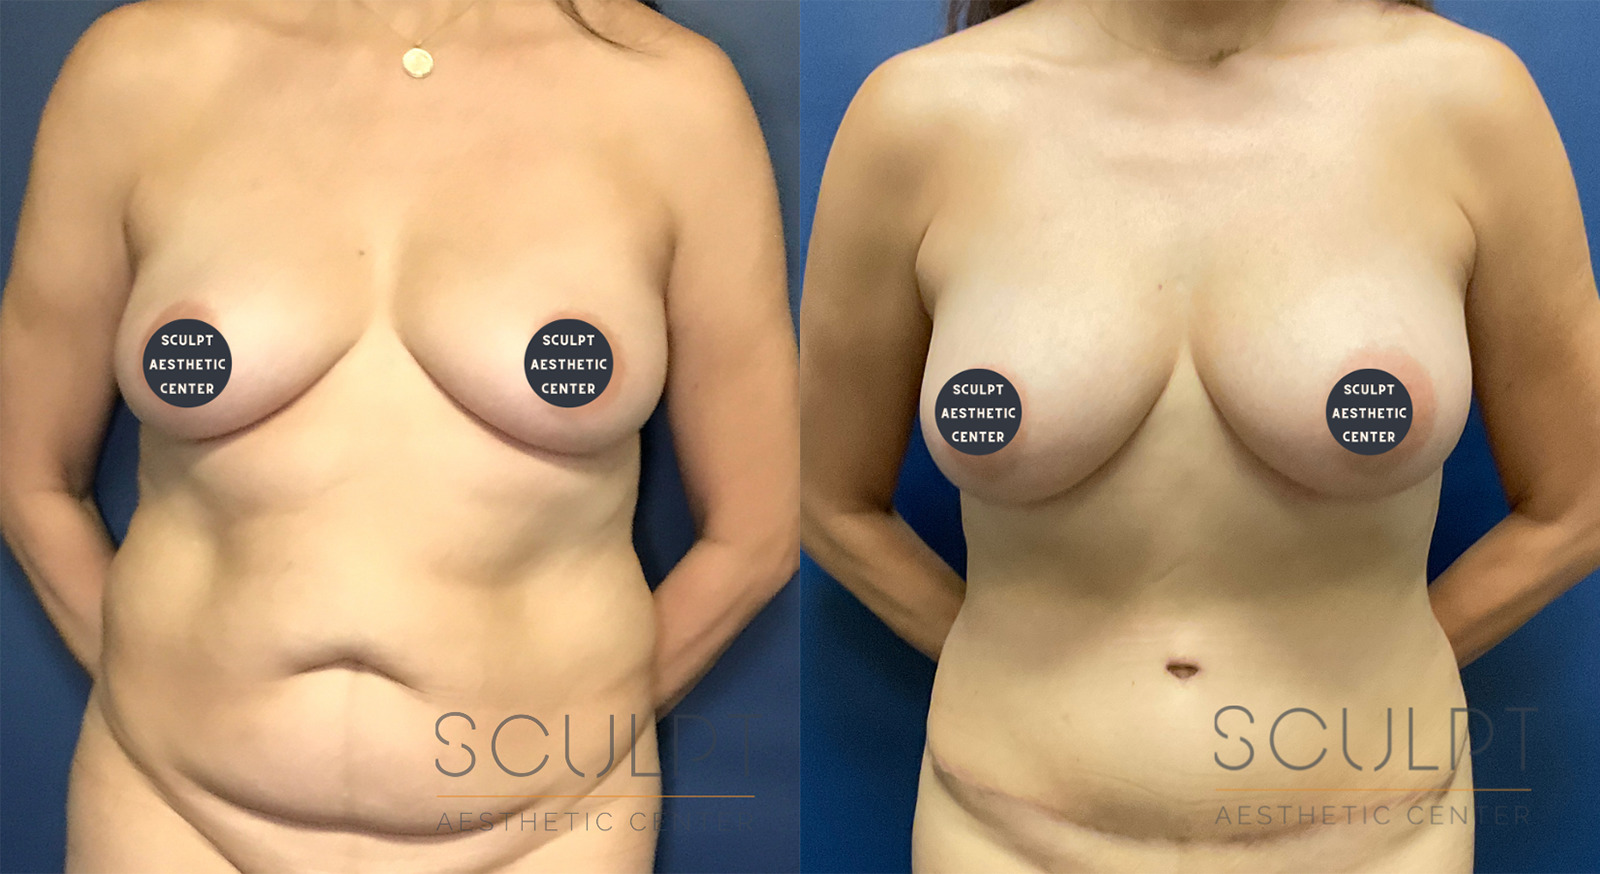 Female Tummy Tuck Before and After Photo by Sculpt Aesthetic Center in Frisco, TX